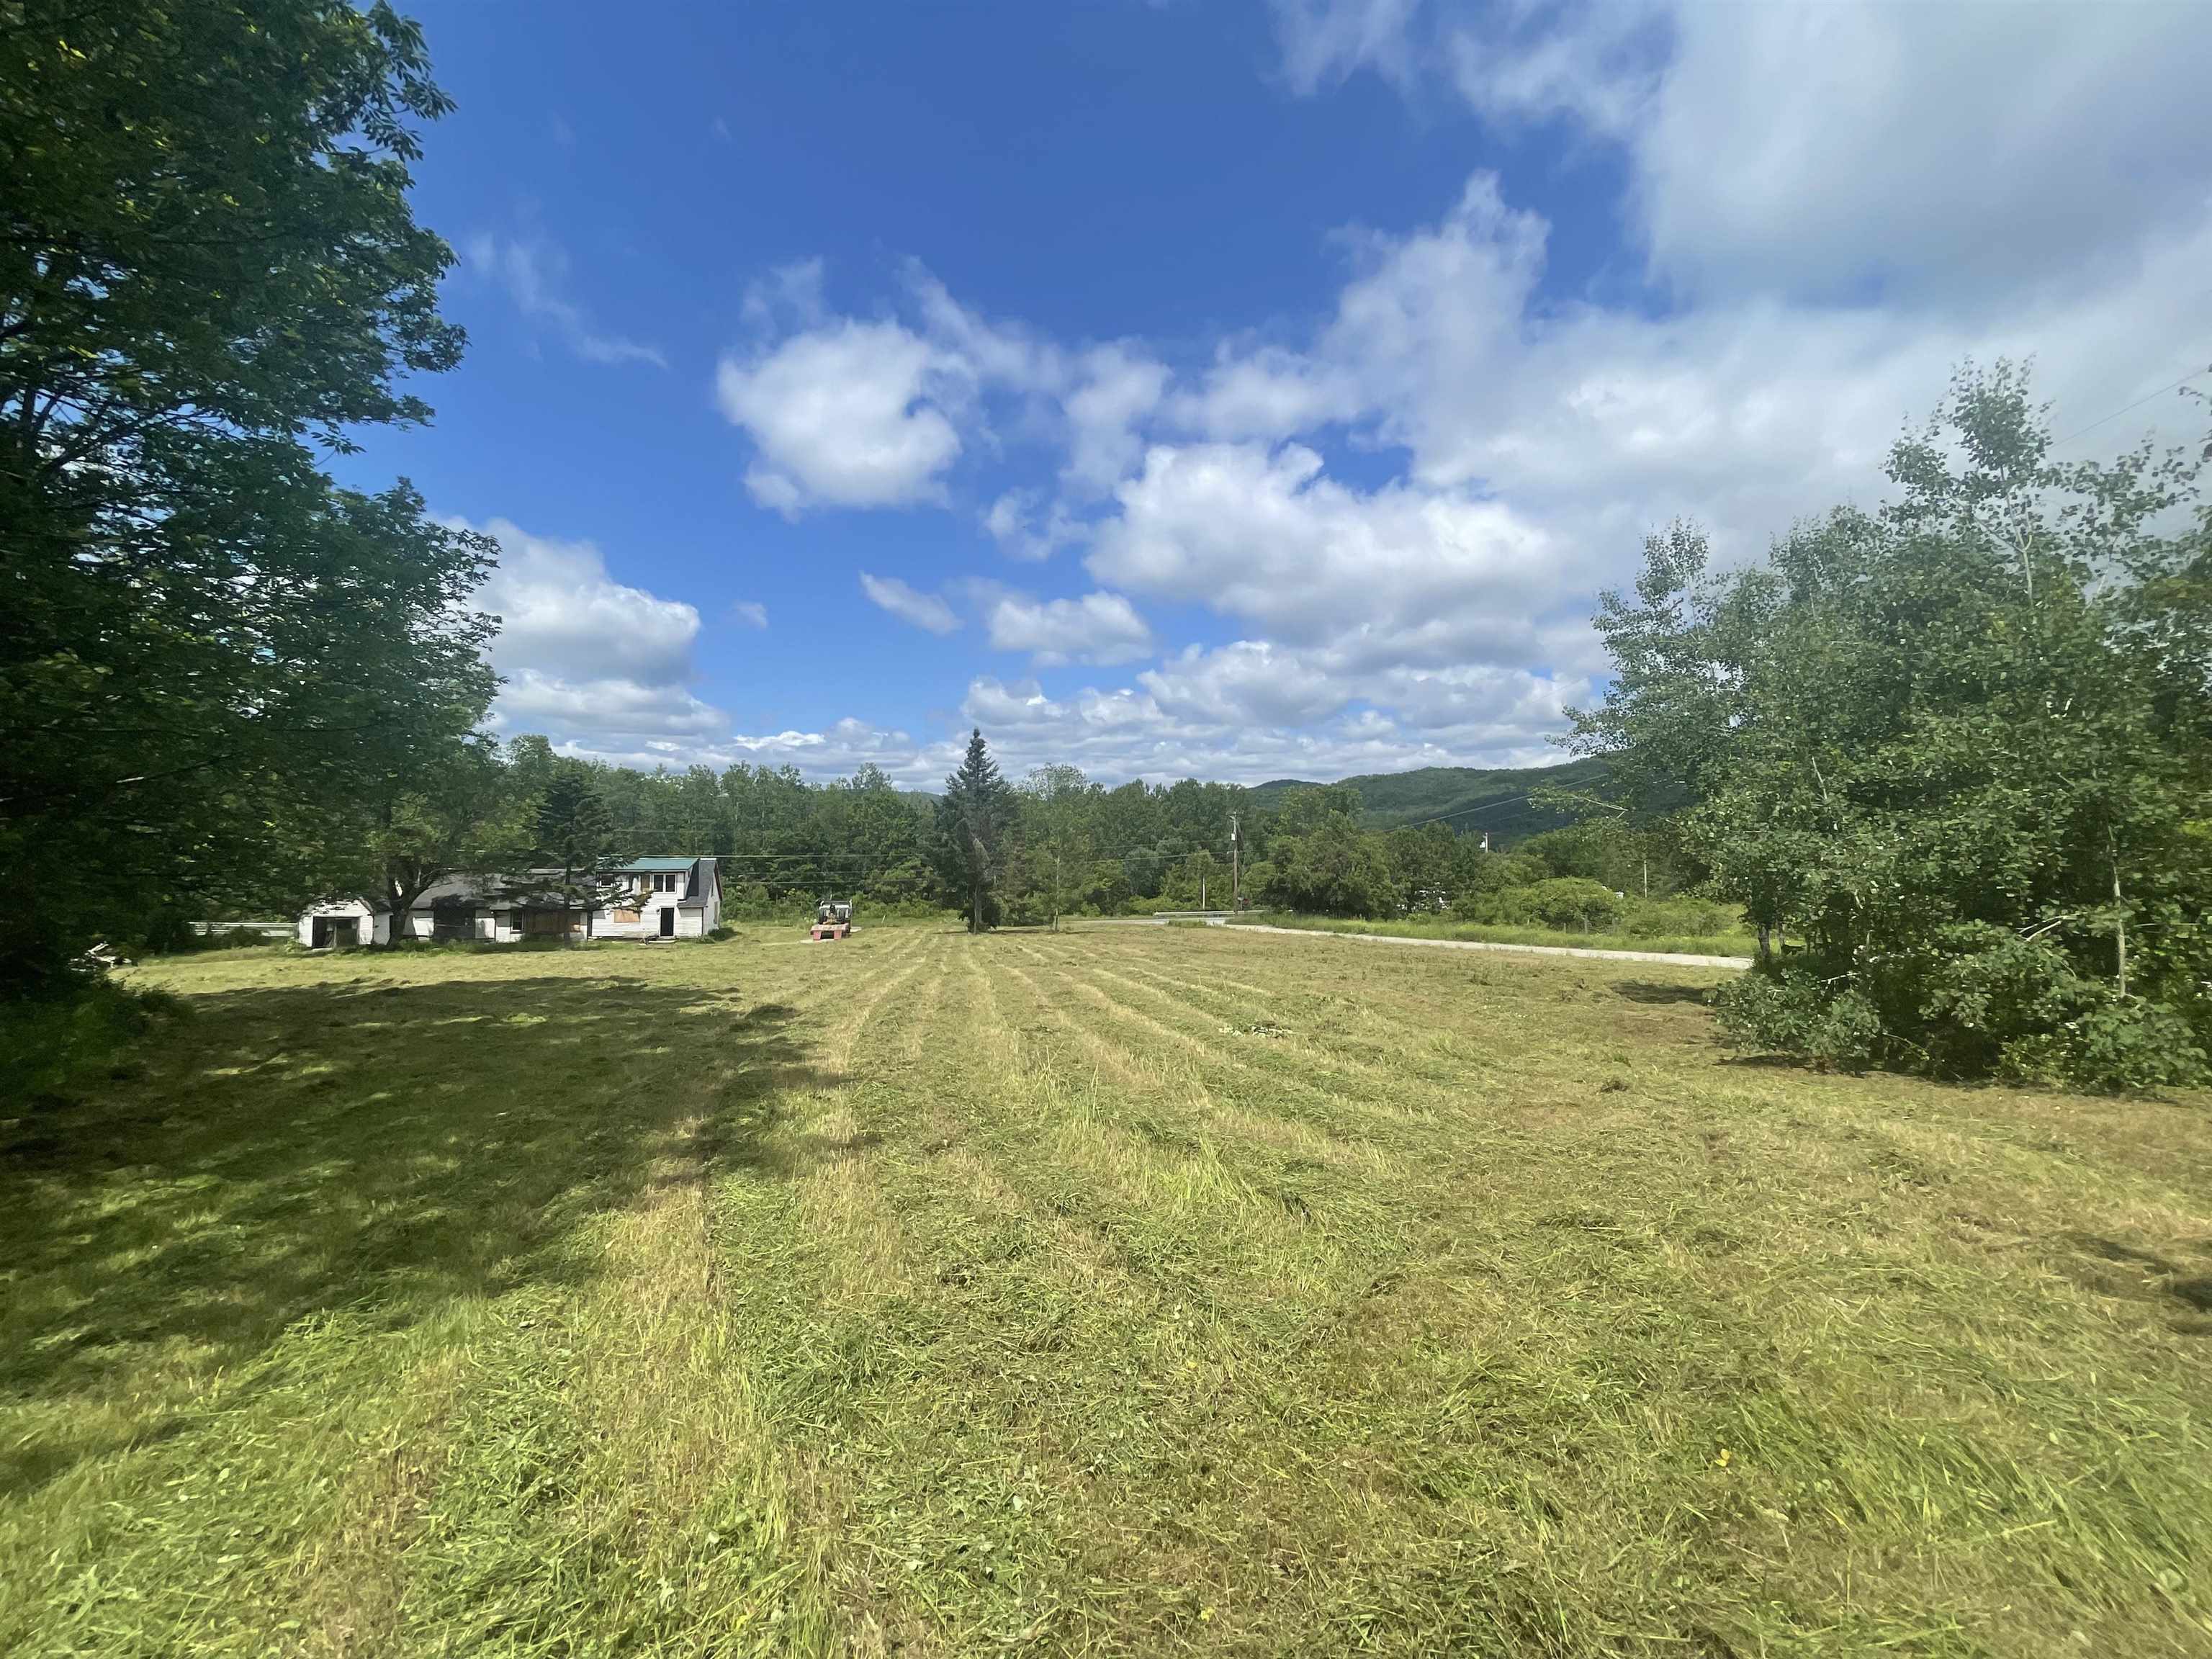 Townshend VT Commercial Property for sale $190,000 $90 per sq.ft.